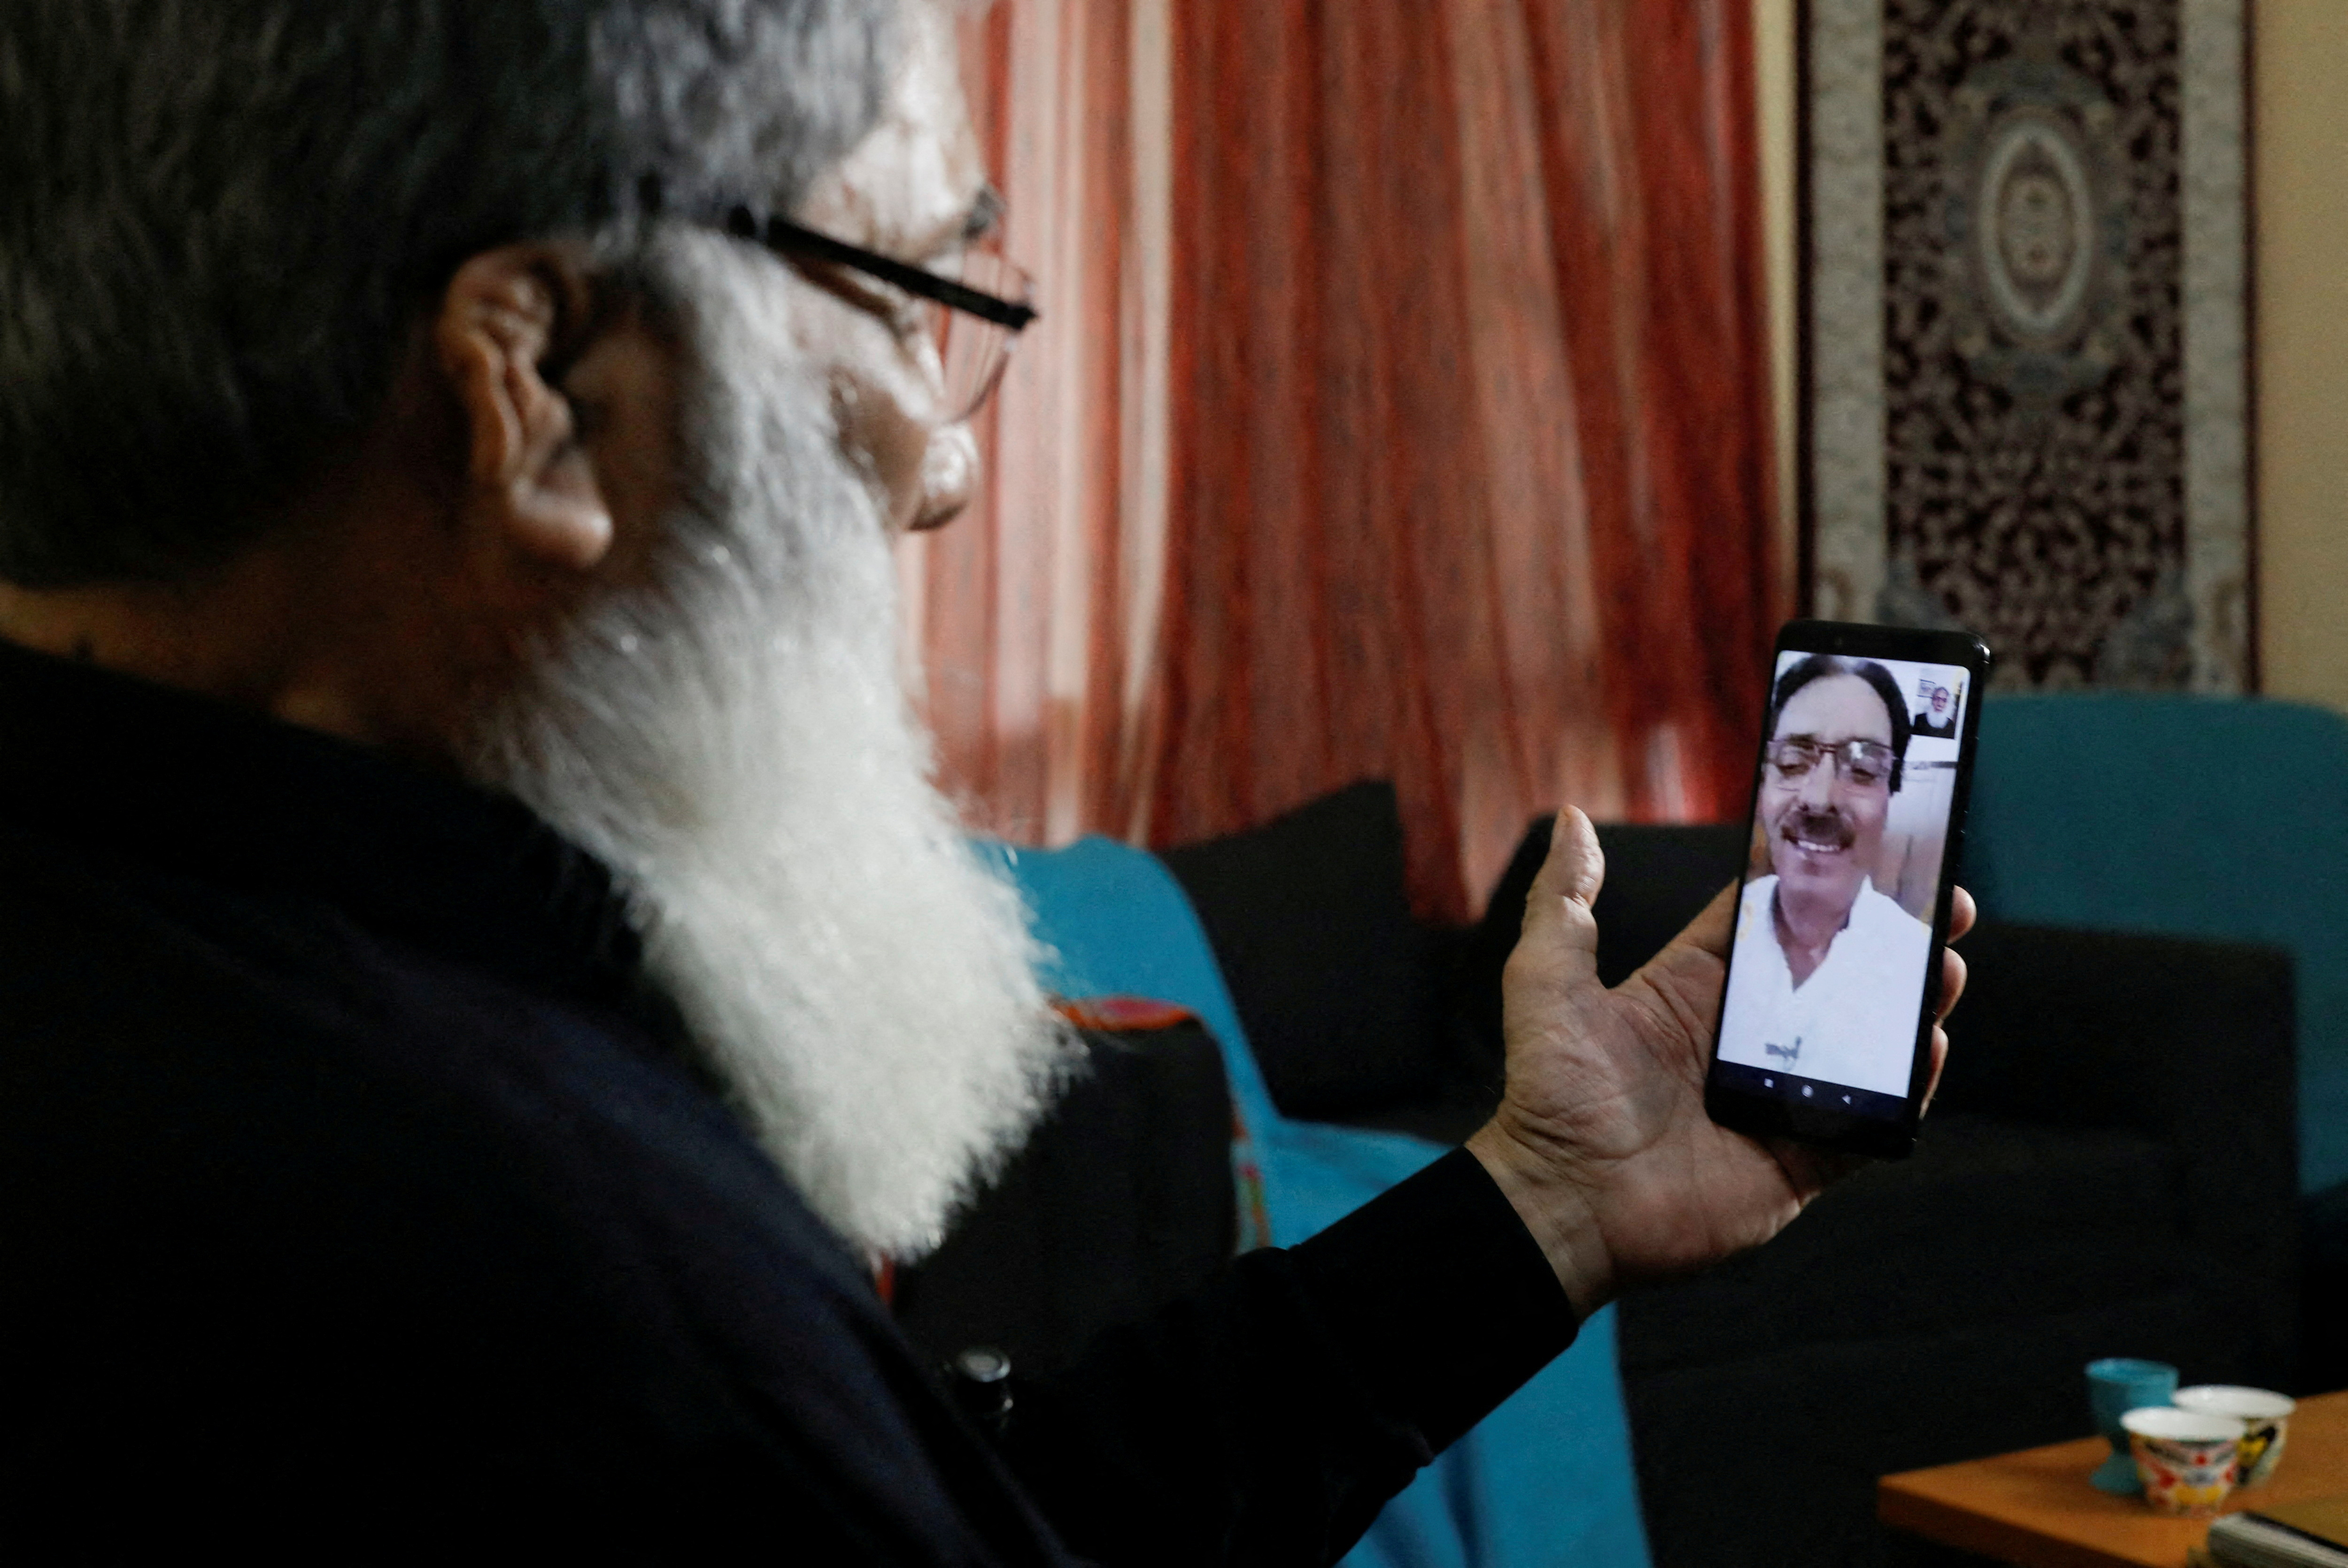 Ali Hasan Baqai, speaks on a video call, with his Indian citizen brother Abid Hasan Baqai, at his home in Karachi